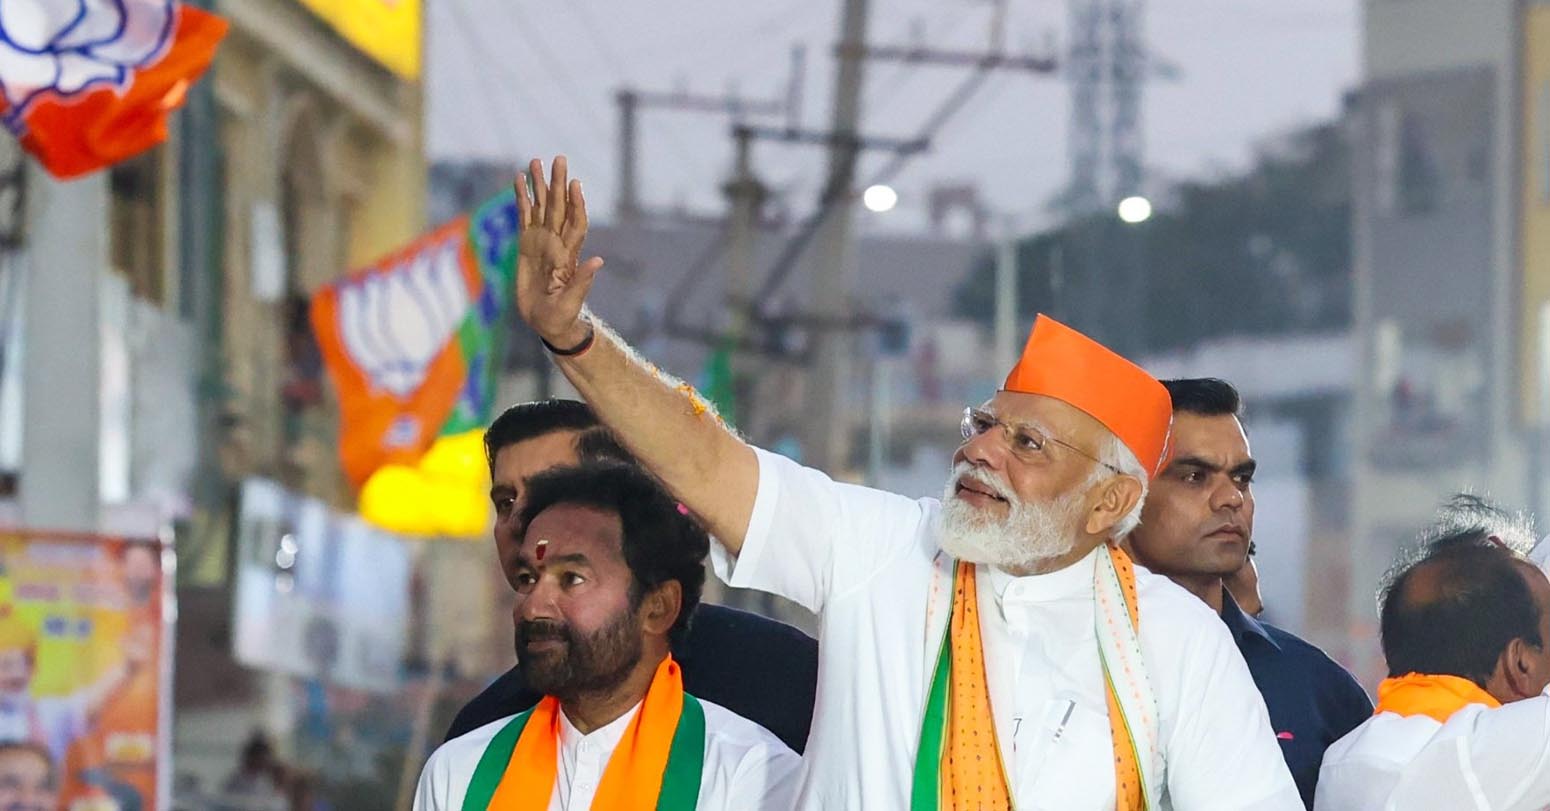 Opponents And Journalists Feel The Squeeze Ahead Of Election In Modi’s India